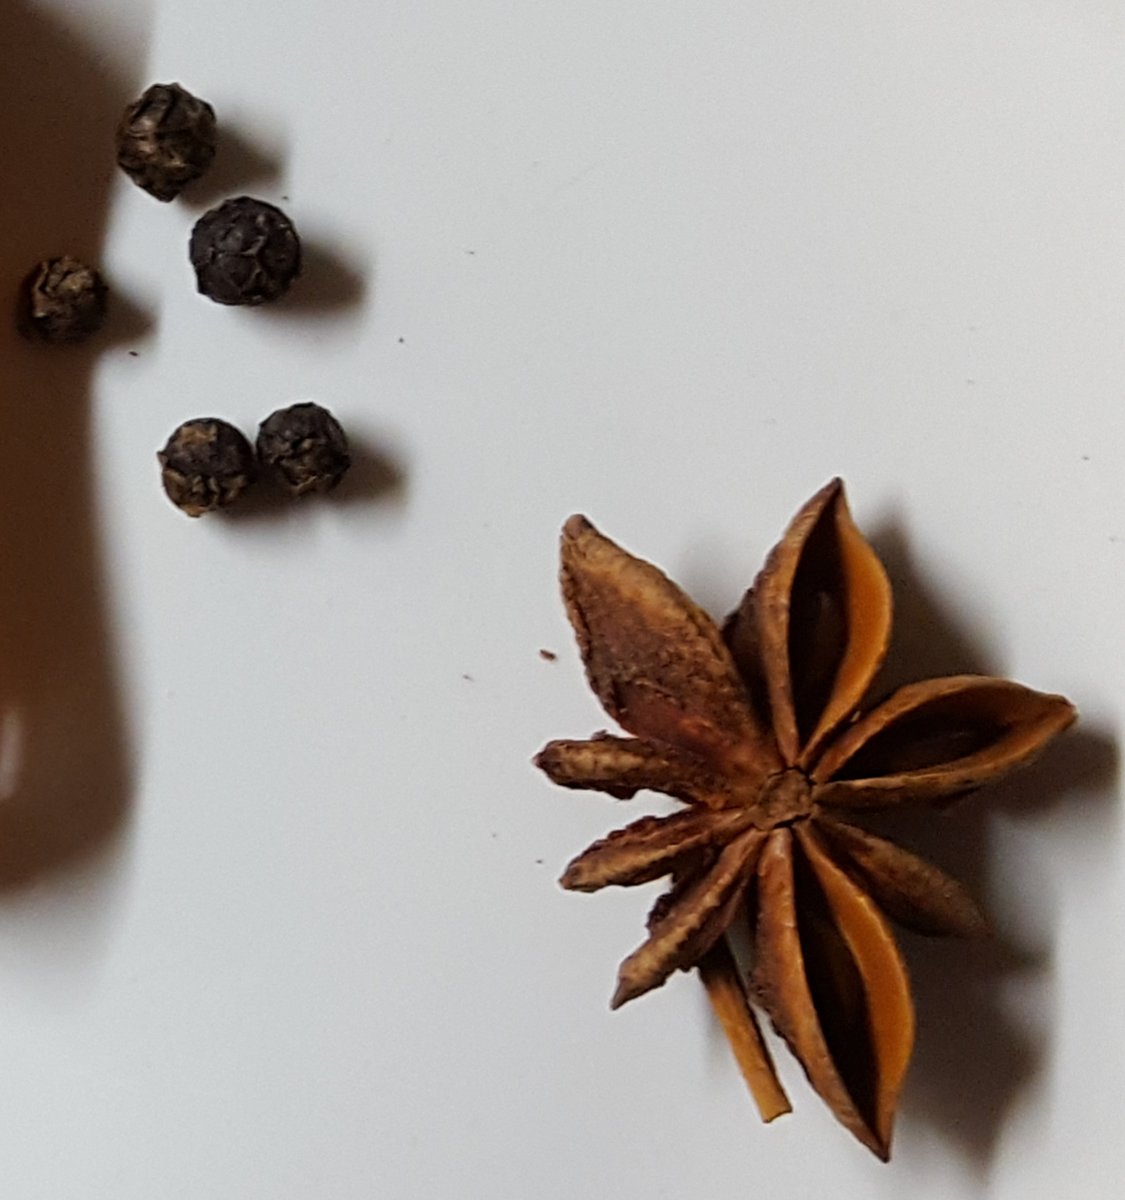 ... and they can be present in fruits, such as in black pepper (Piper nigrum) and star anise (Illicium verum). Actually, they can be present in multiple organs of the same plant!